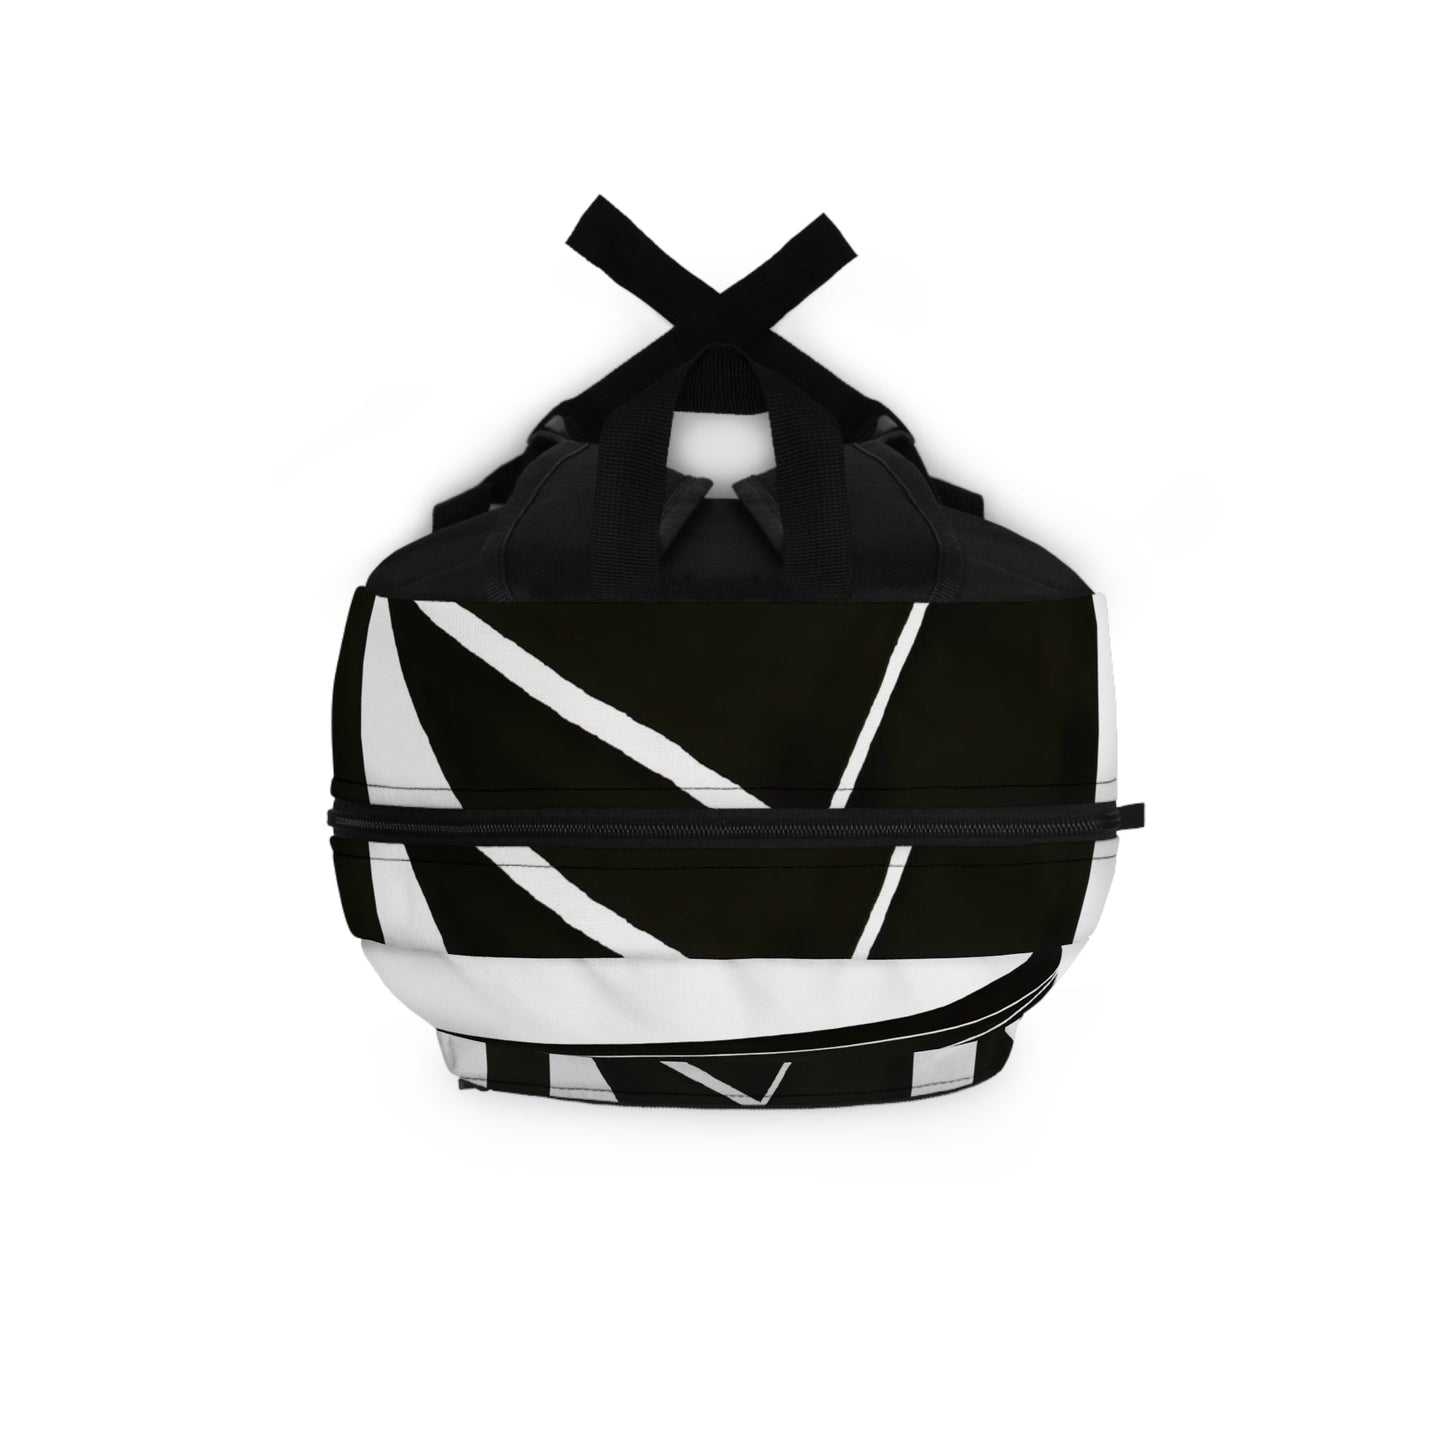 Backpack - Large Water-Resistant Bag, Black And White Geometric